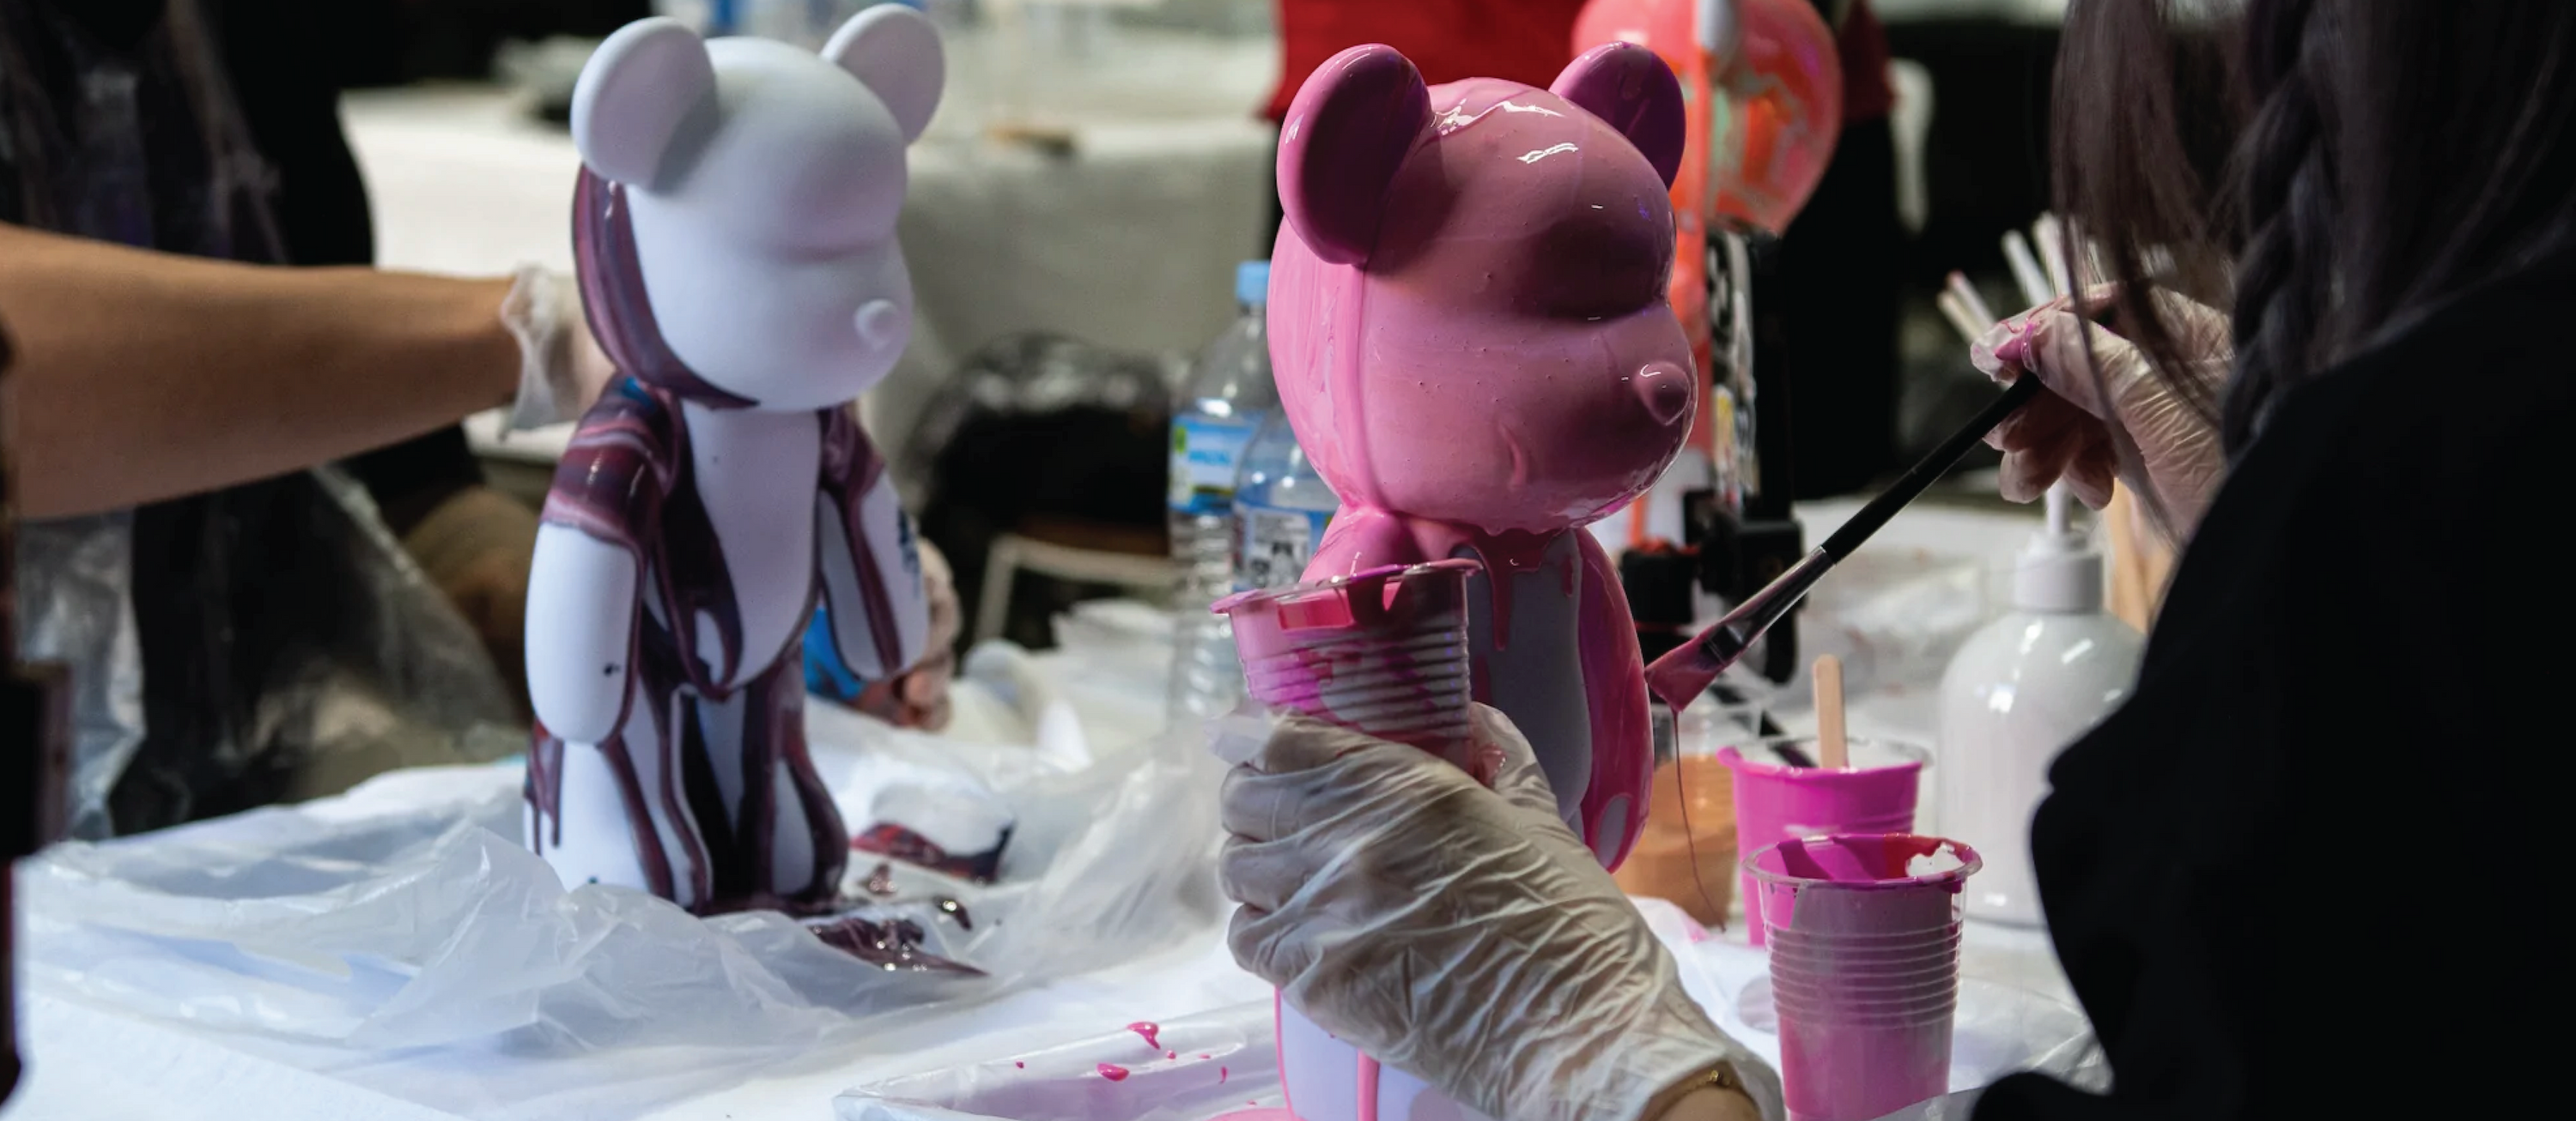 A white and pink bear being painted at the Fluid Project workshop